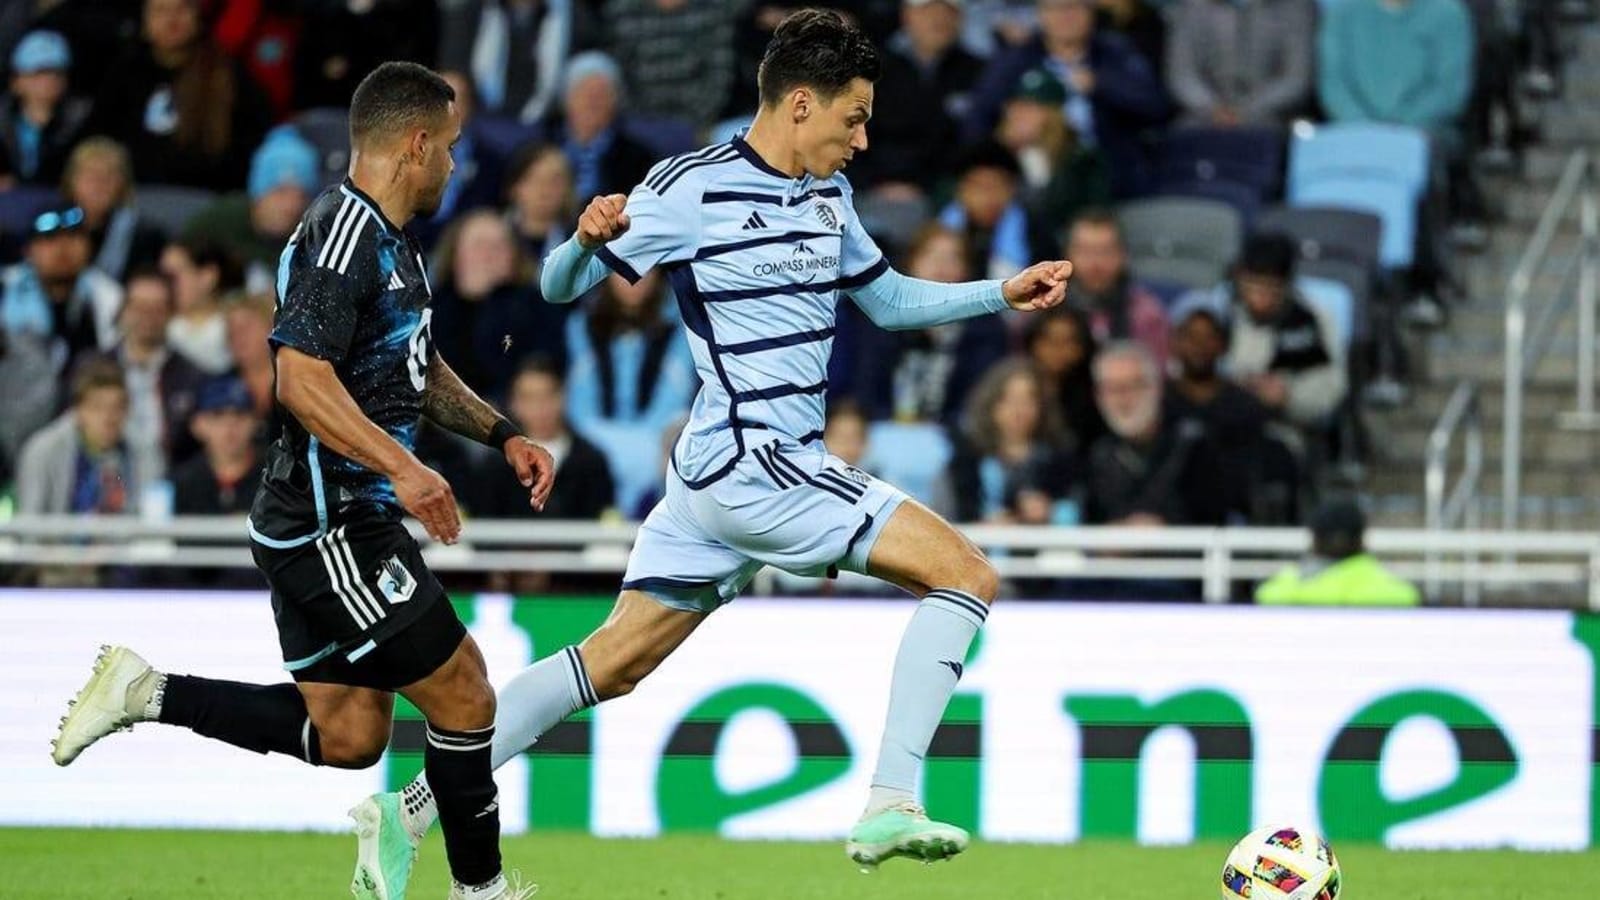 Sporting KC face Dynamo with much-needed momentum